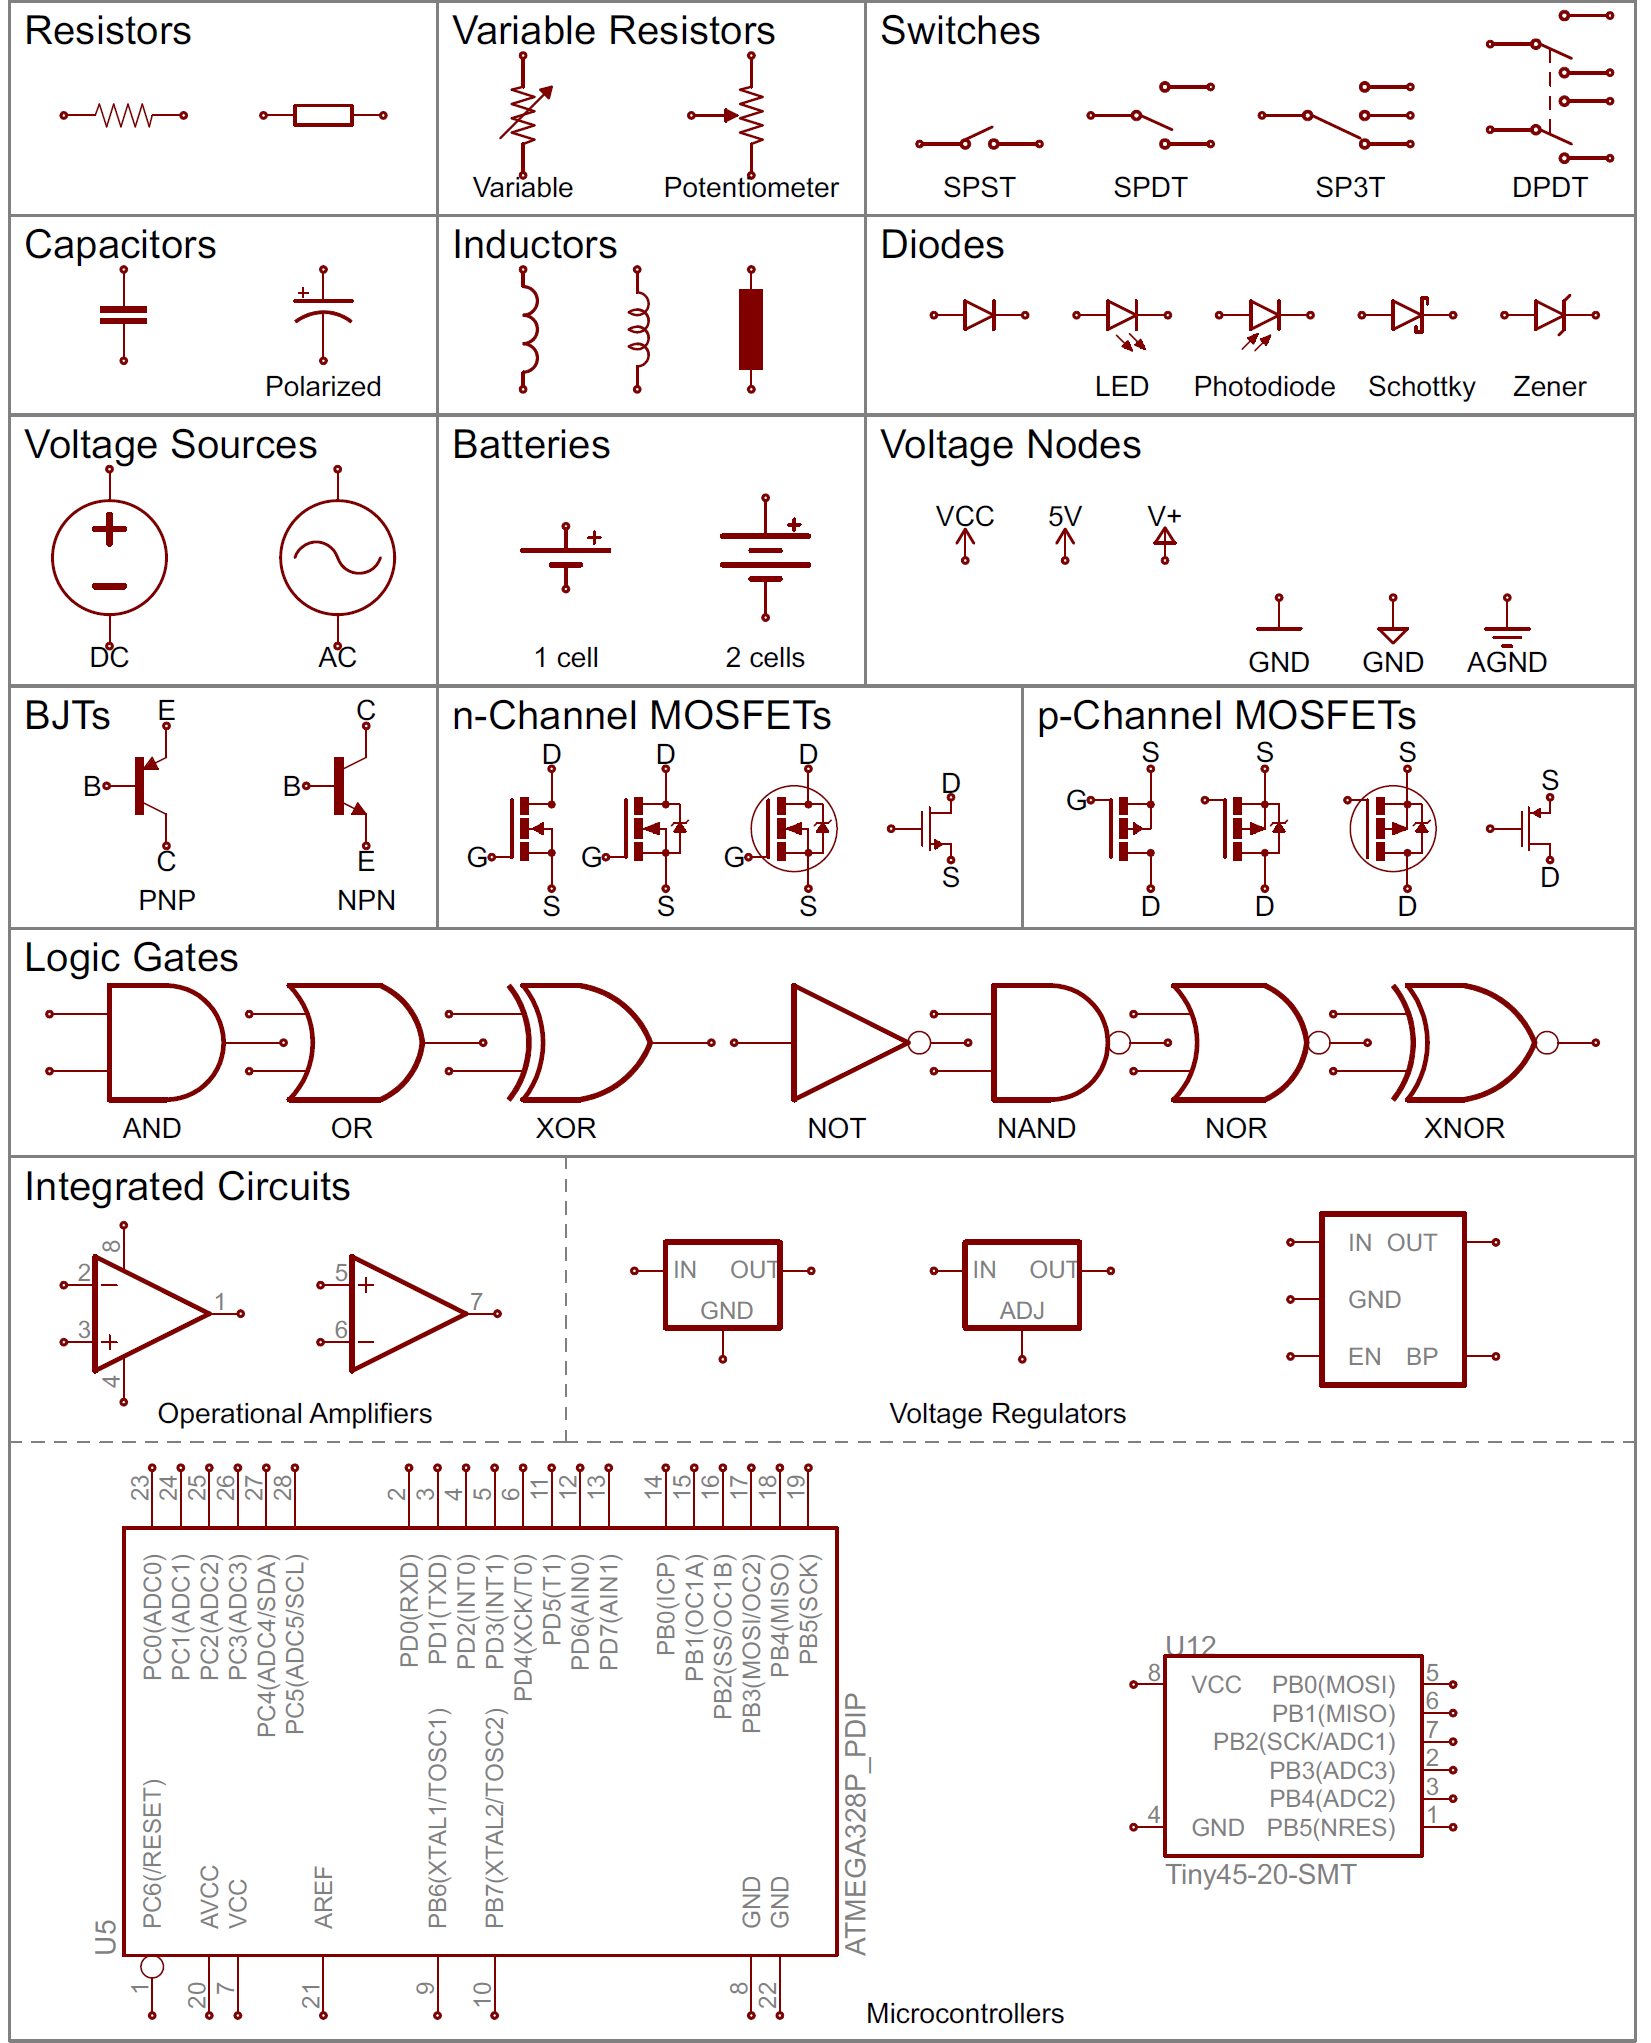 How to Read a Schematic - learn.sparkfun.com Amplifier Wiring Diagram Sparkfun Learn - SparkFun Electronics